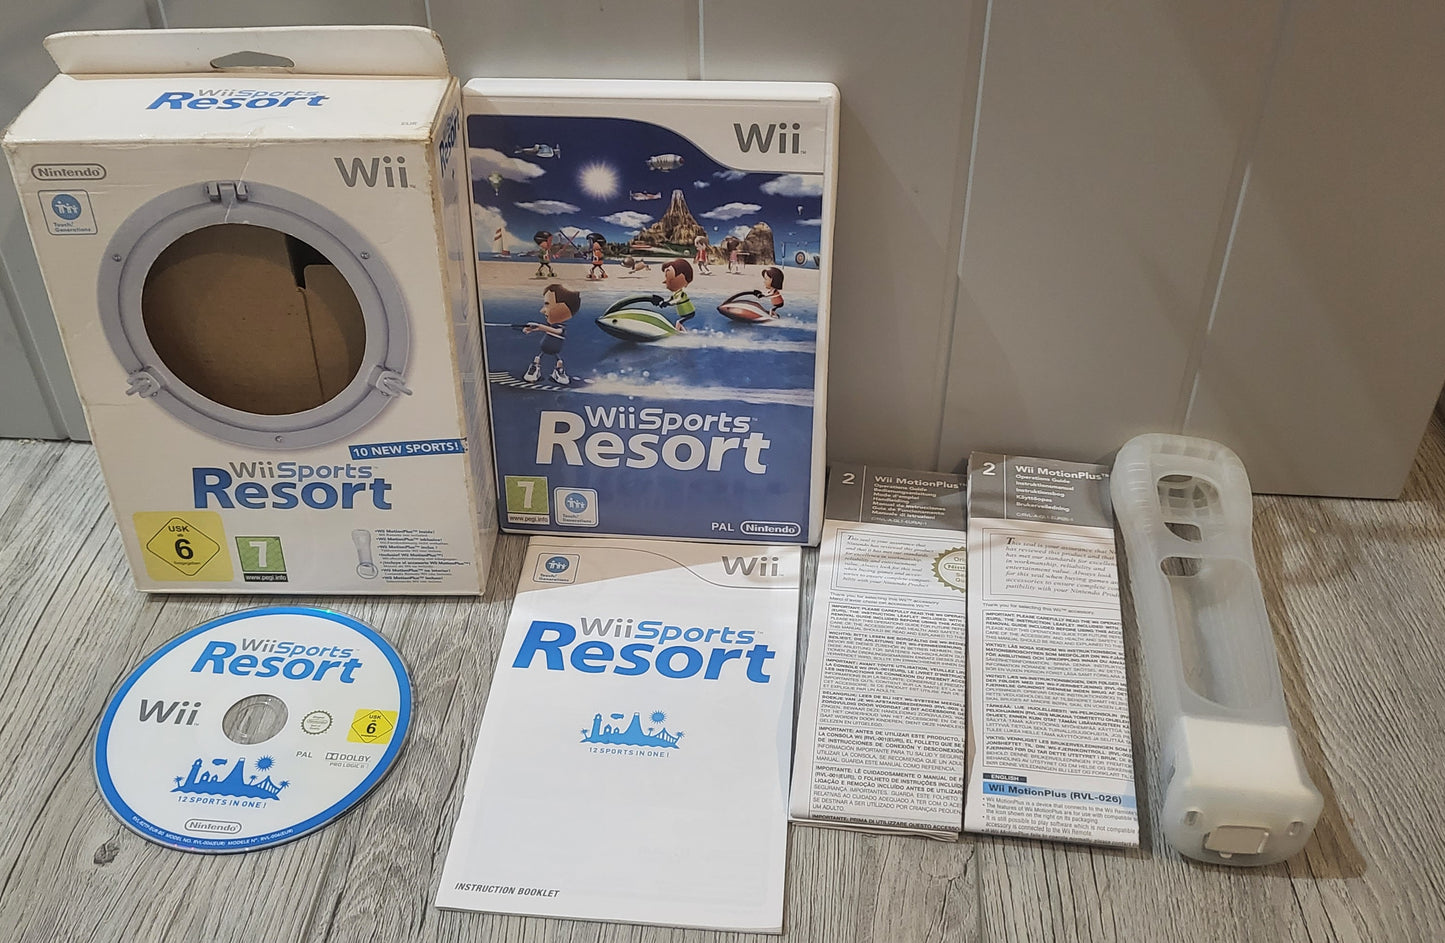 Boxed Wii Sports Resort with MotionPlus Nintendo Wii Game & Accessory